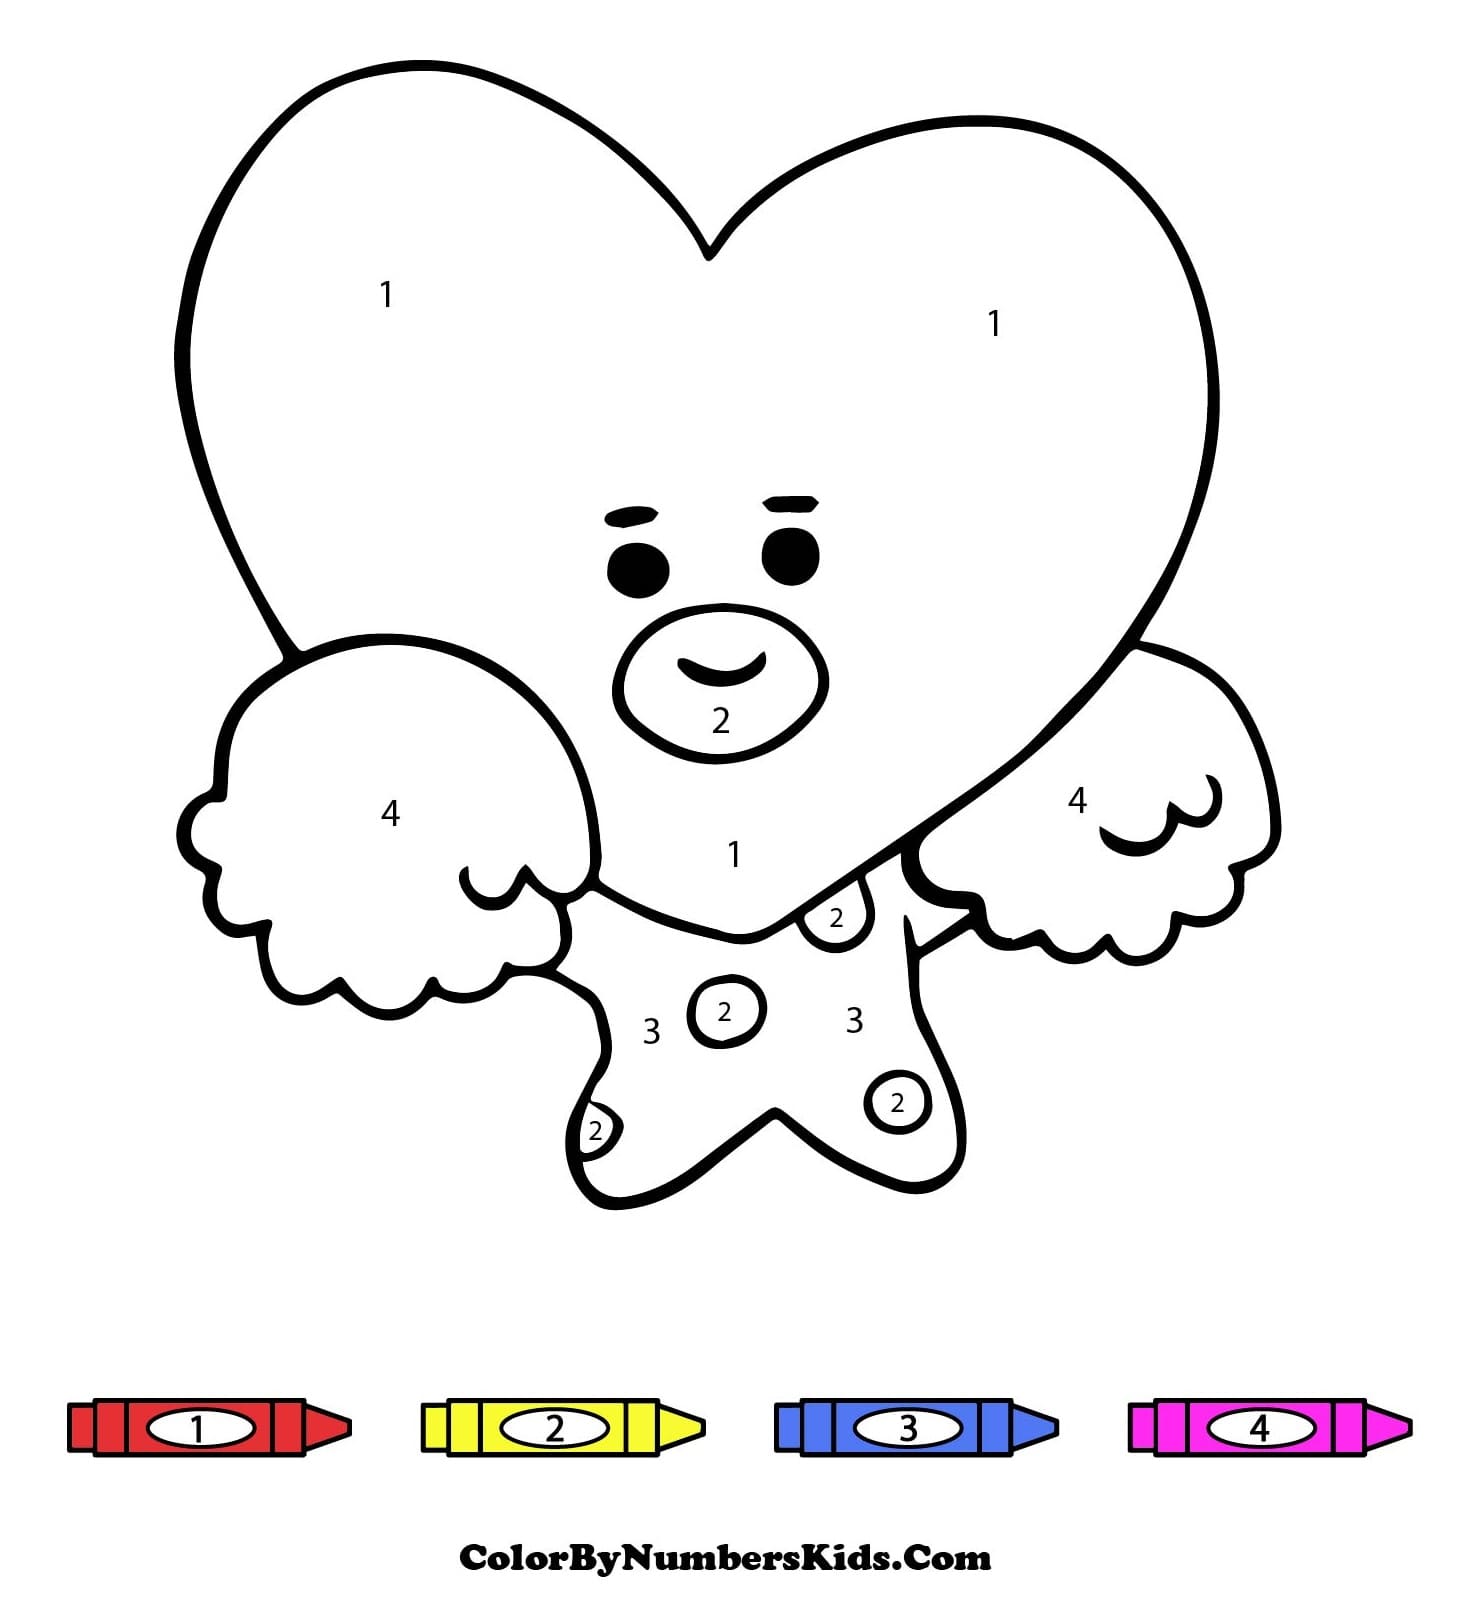 Tata BT21 Color By Number